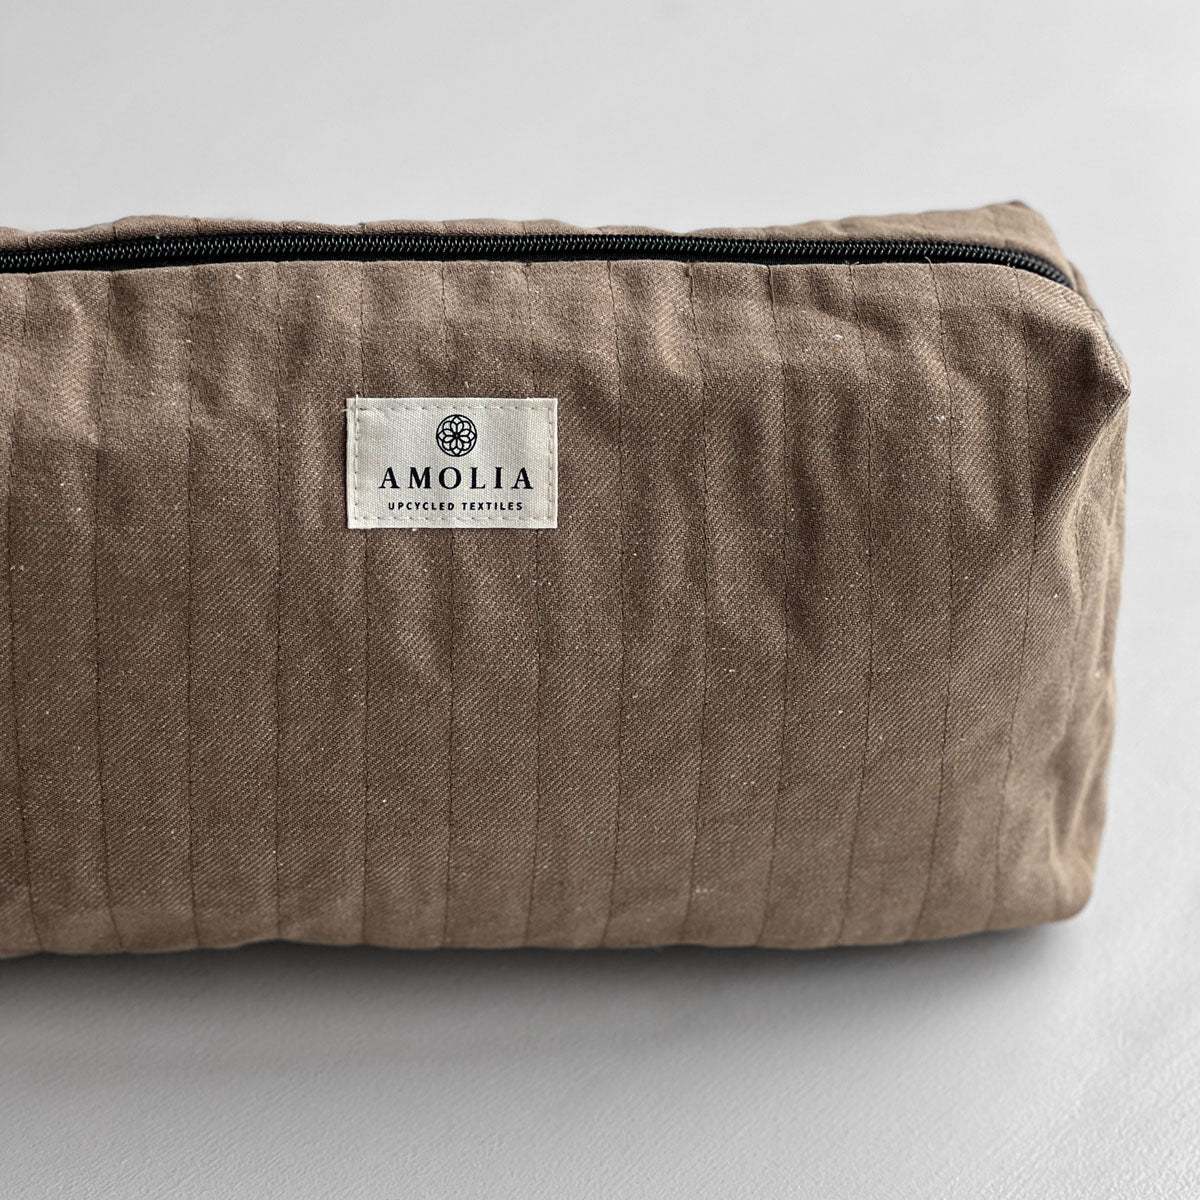 Upcycled toiletry bag, large, brown